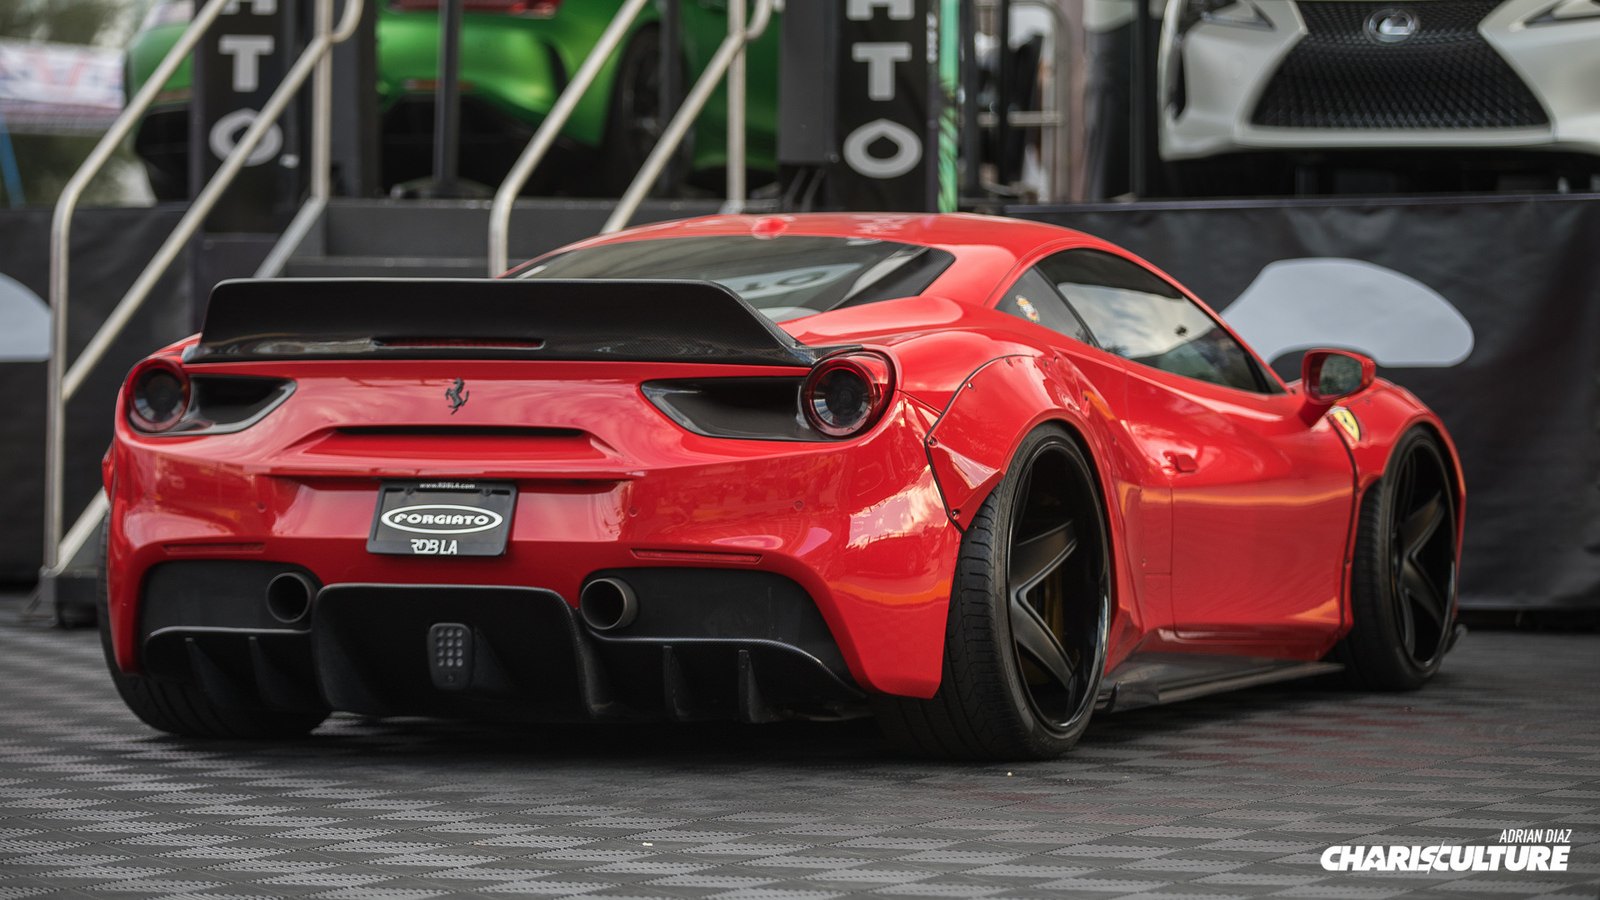 Red Ferrari 488 with Carbon Fiber Rear Spoiler - Photo by The Charis Culture